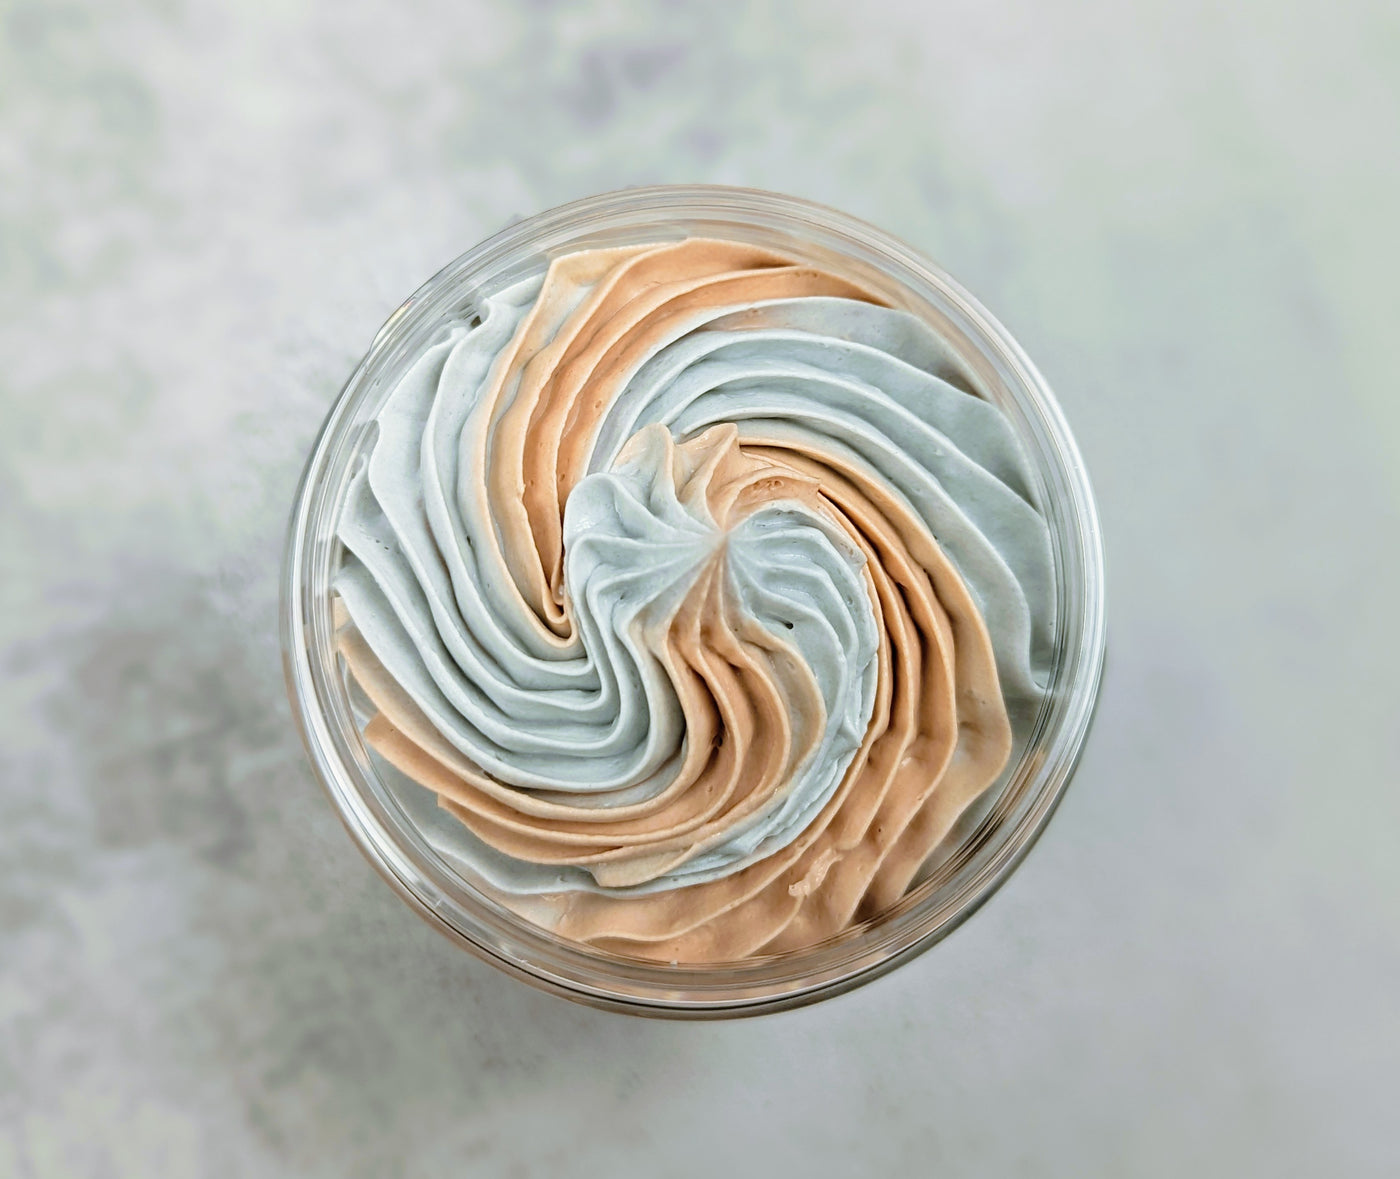 Whipped Body Butter - Warm & Cozy